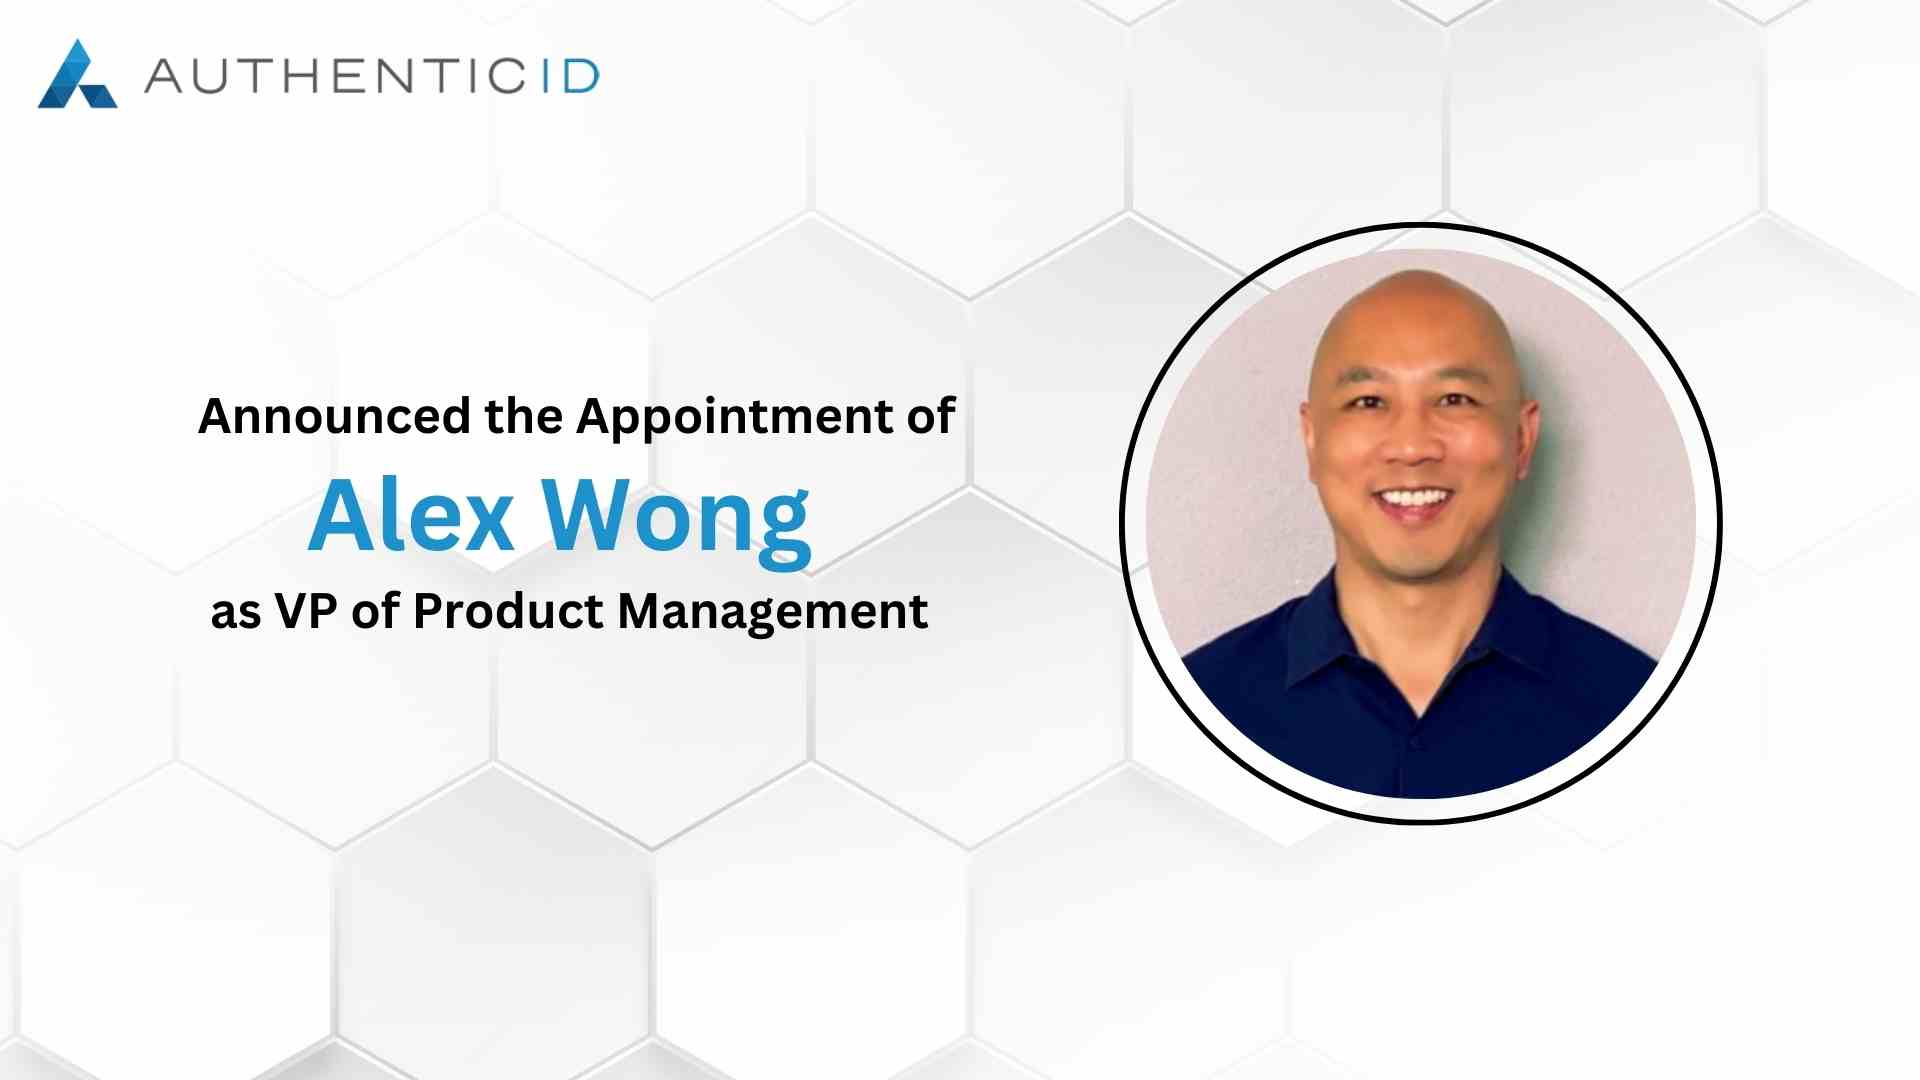 Alex Wong Joins AuthenticID as VP of Product Management to Spearhead New Next-Gen Identity Platform in 2024